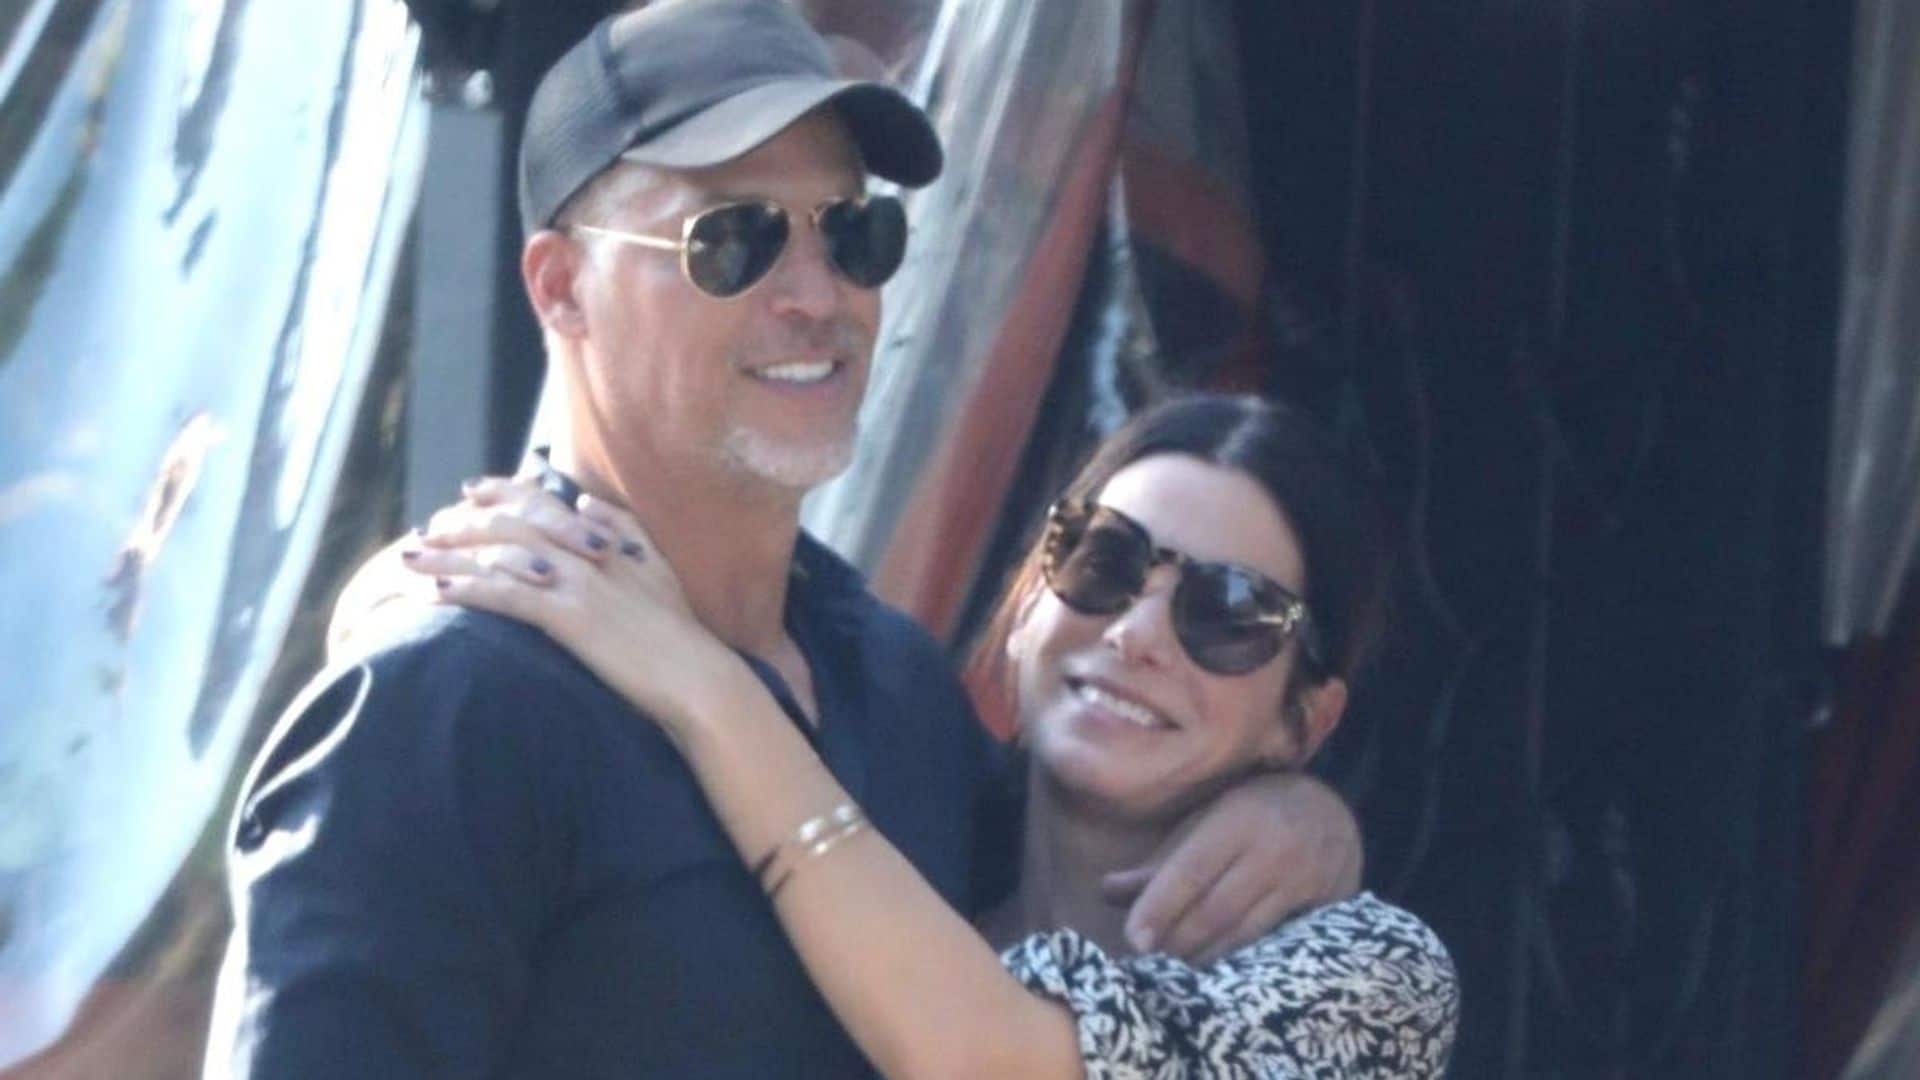 Sandra Bullock fulfills her promise to Bryan Randall on what would have been his 58th birthday